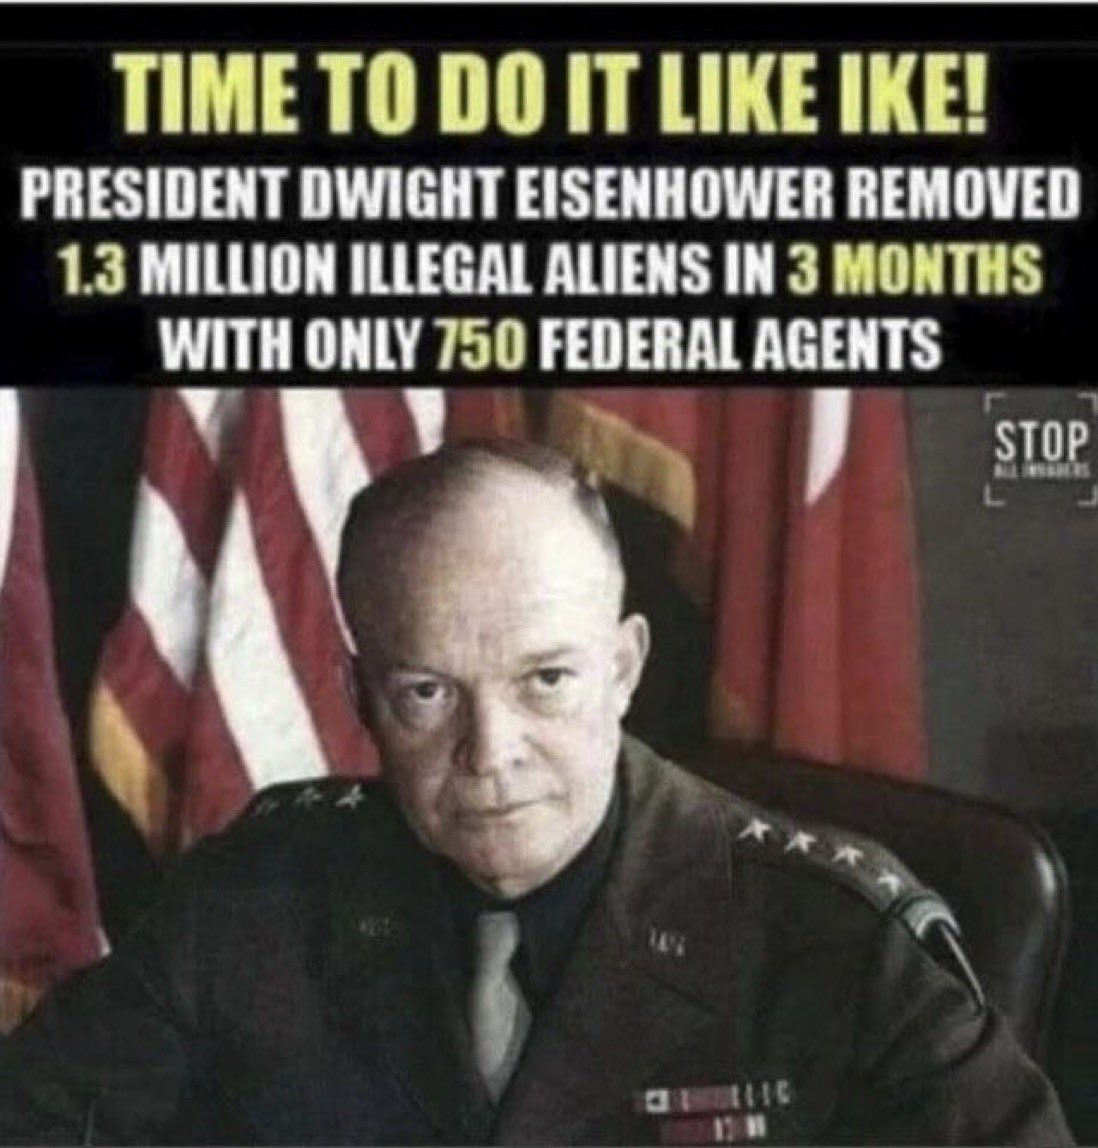 This was impressive! But this time Trump needs to outrun even Ike!! We need to hunt them all down and get them out of here!! They were brought in to serve our enemy Satans evil American Communist Party!! #AmericanCommunistParty